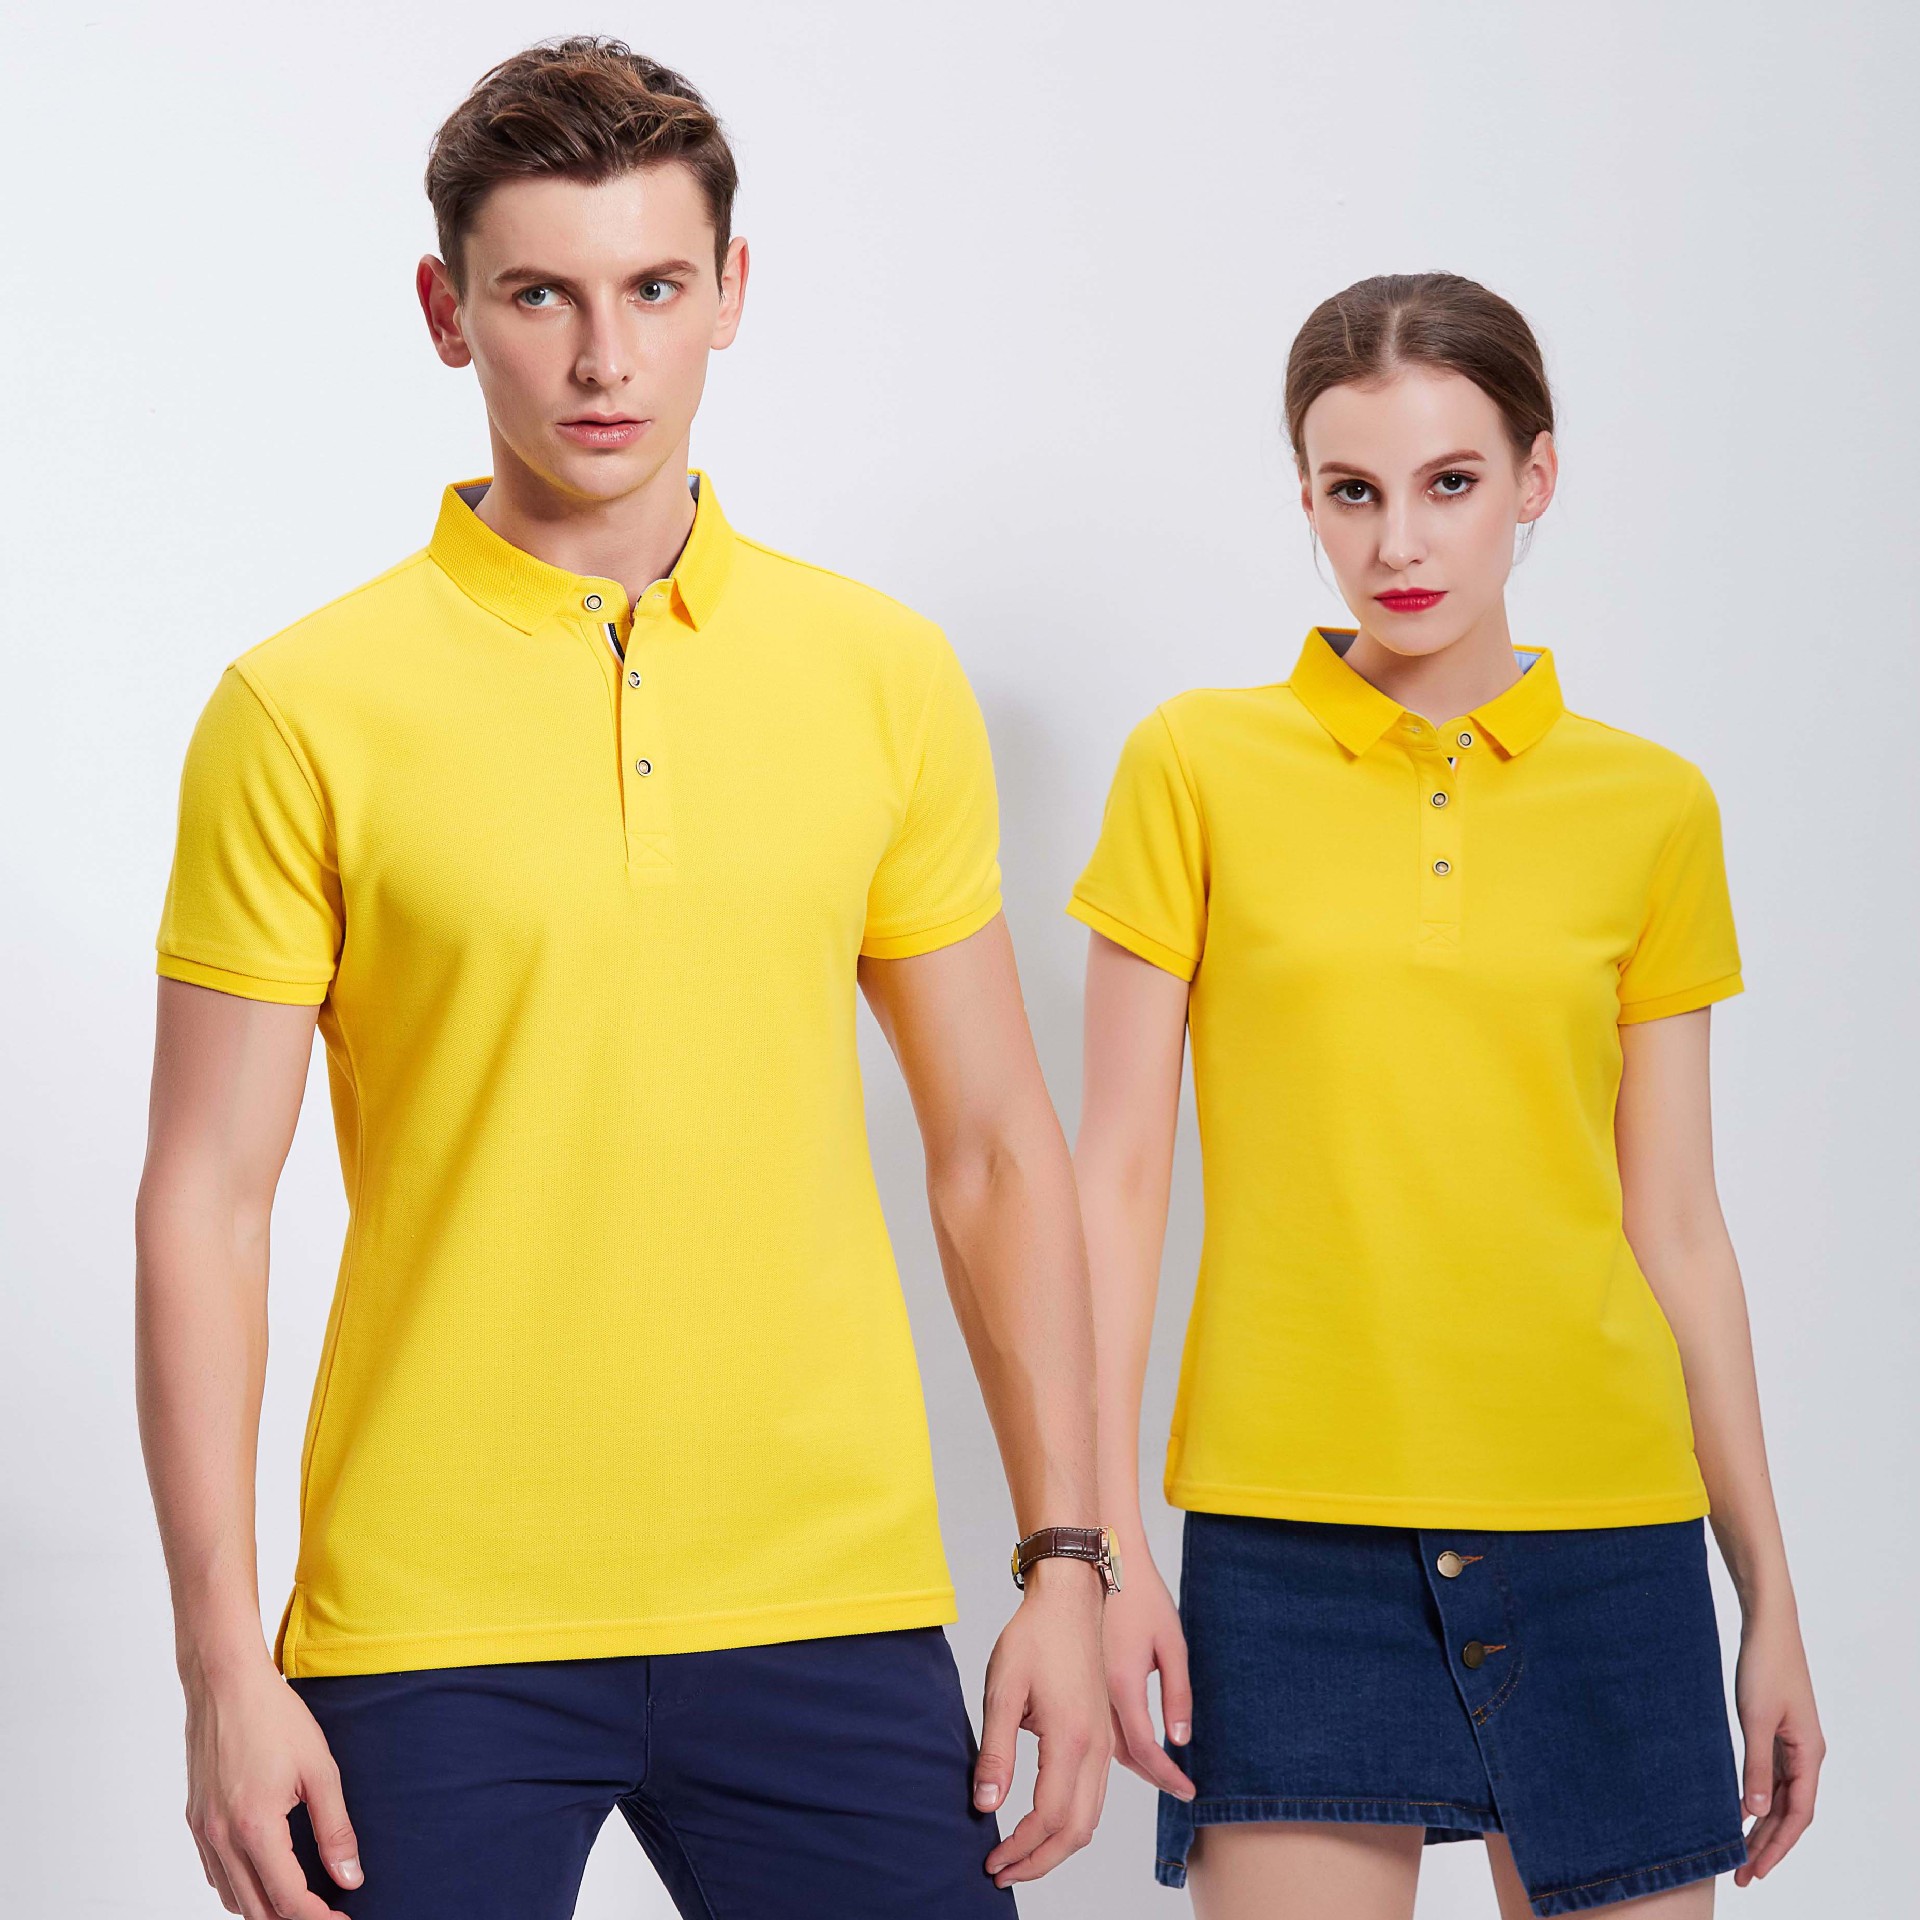 Men polo collar shirts ningbo factory supply solid color plain blank short sleeve golf t shirt for worker